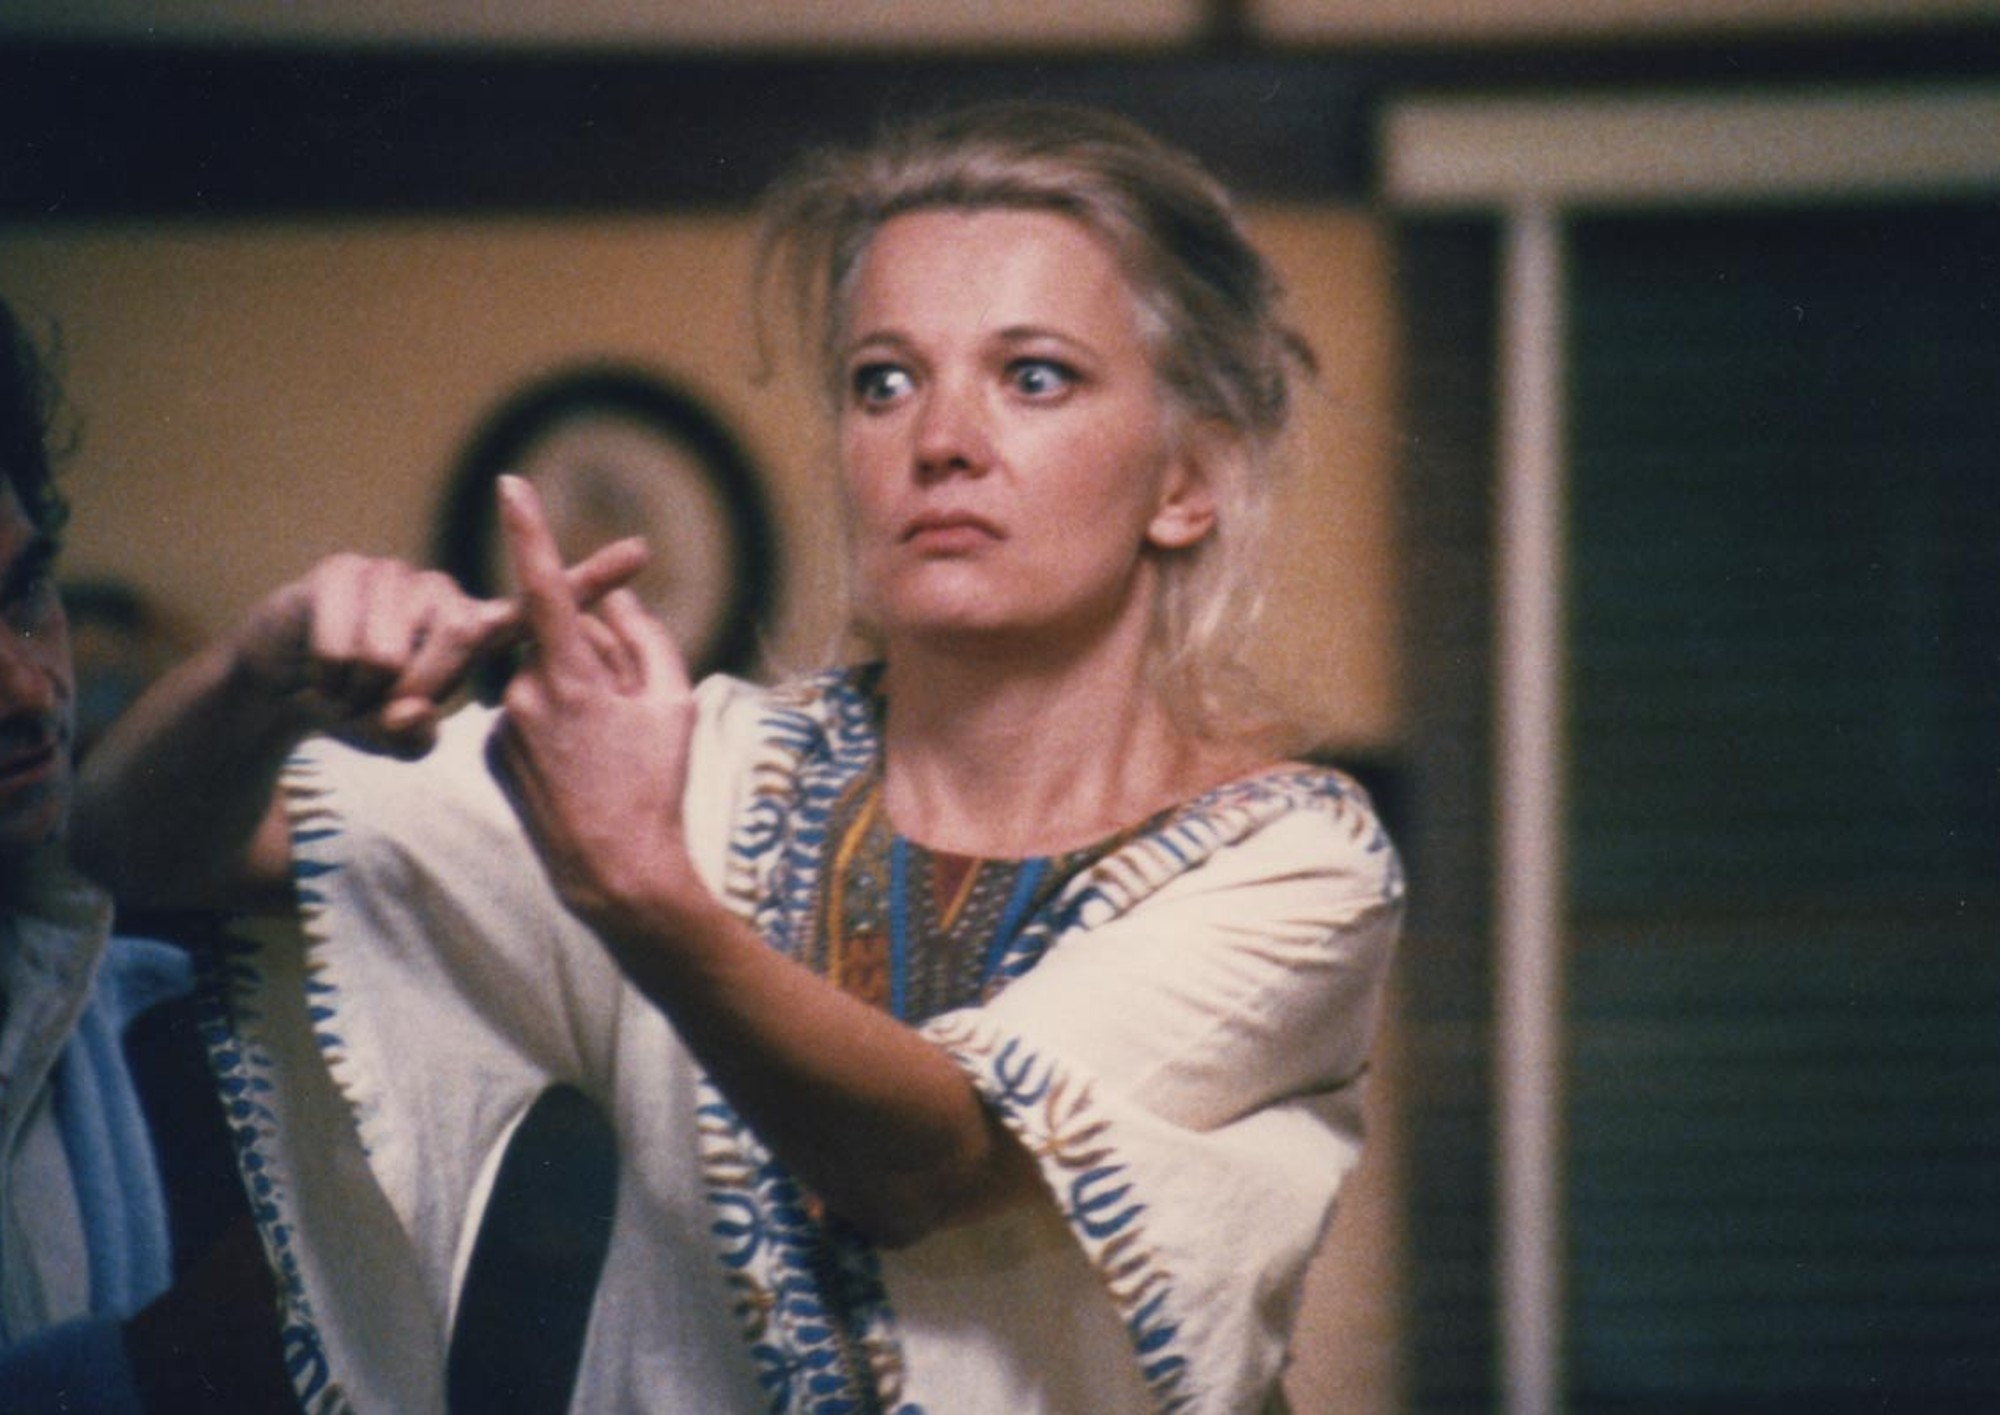 Image from the motion picture A Woman Under the Influence